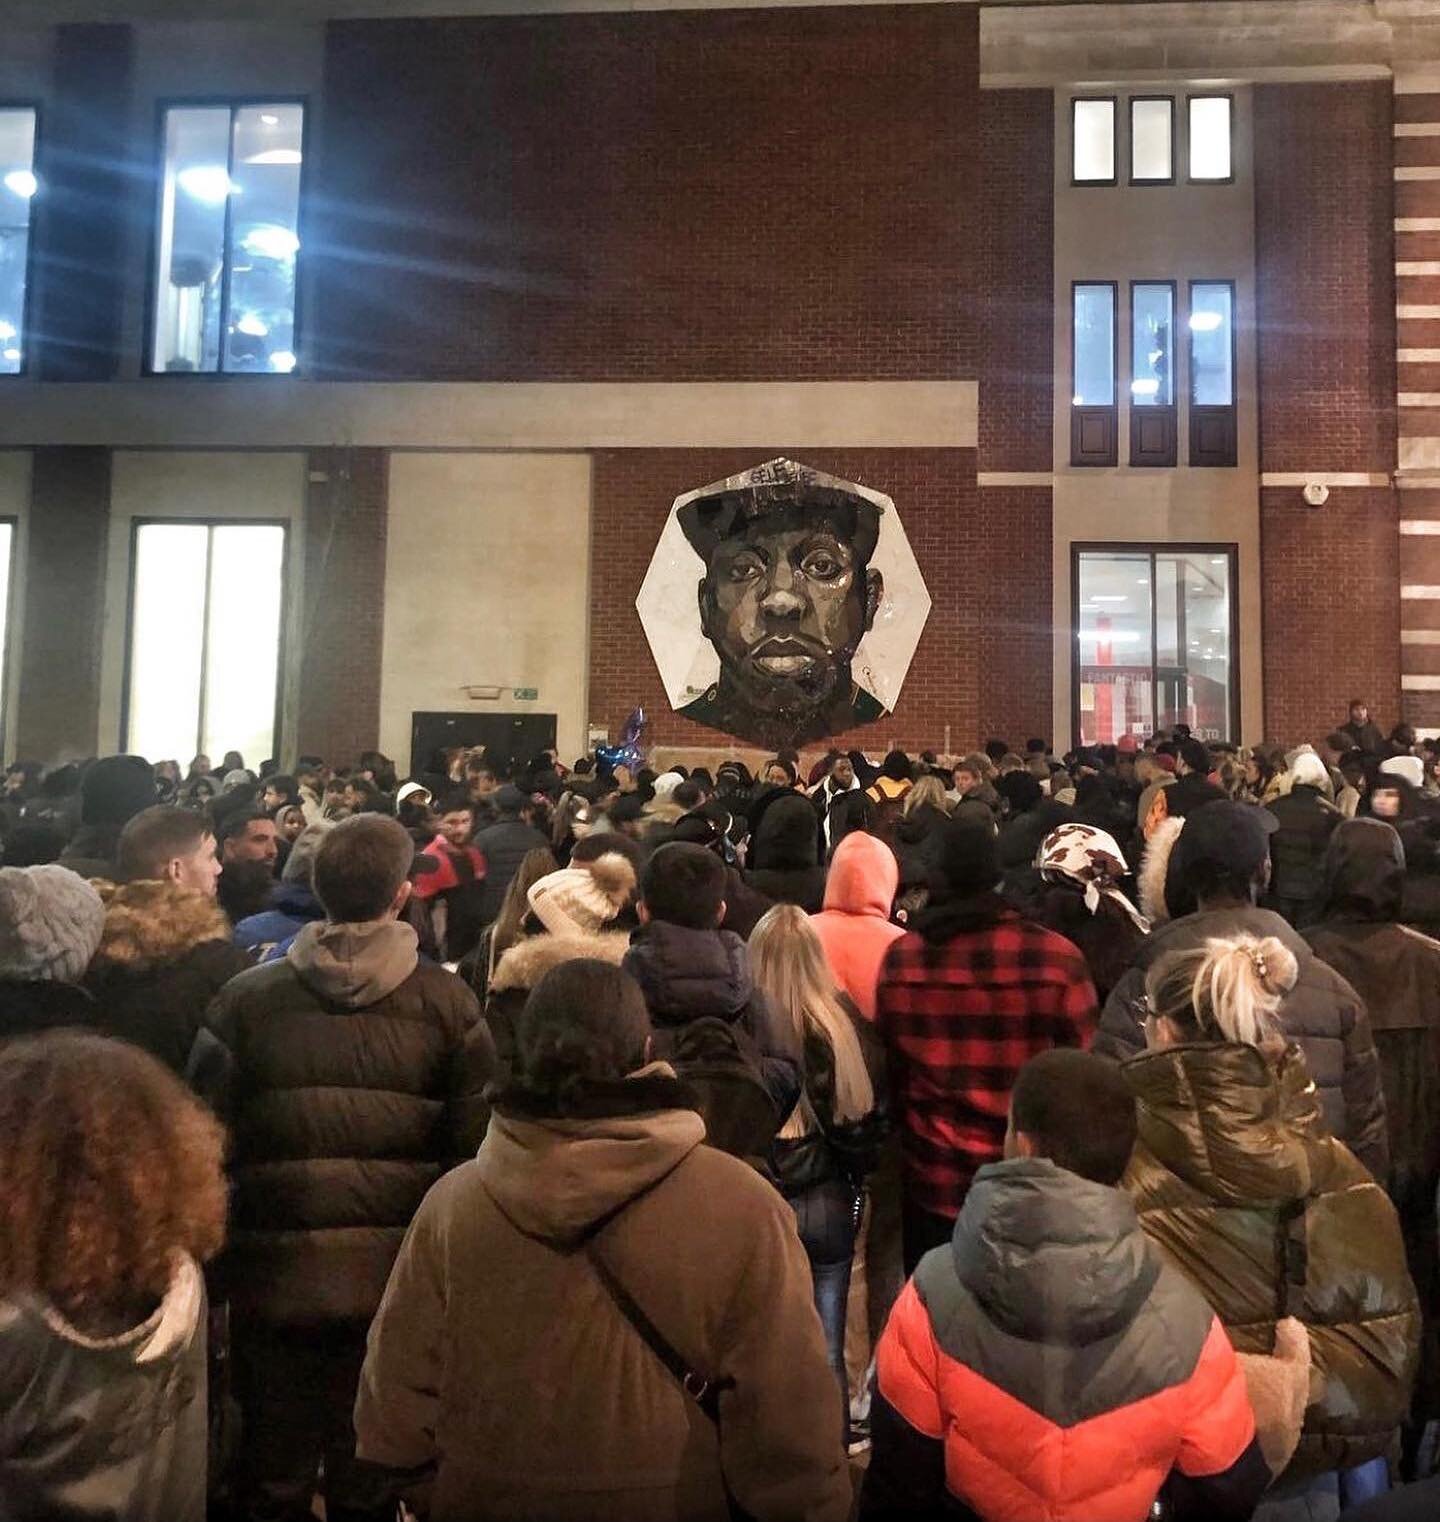 An emotional candlelit vigil was held in Acton last night in honour of local hero Jamal Edwards.  Hundreds gathered to lay flowers, write messages of condolence, and light candles in his memory. 

The influential British entrepreneur, DJ and founder 